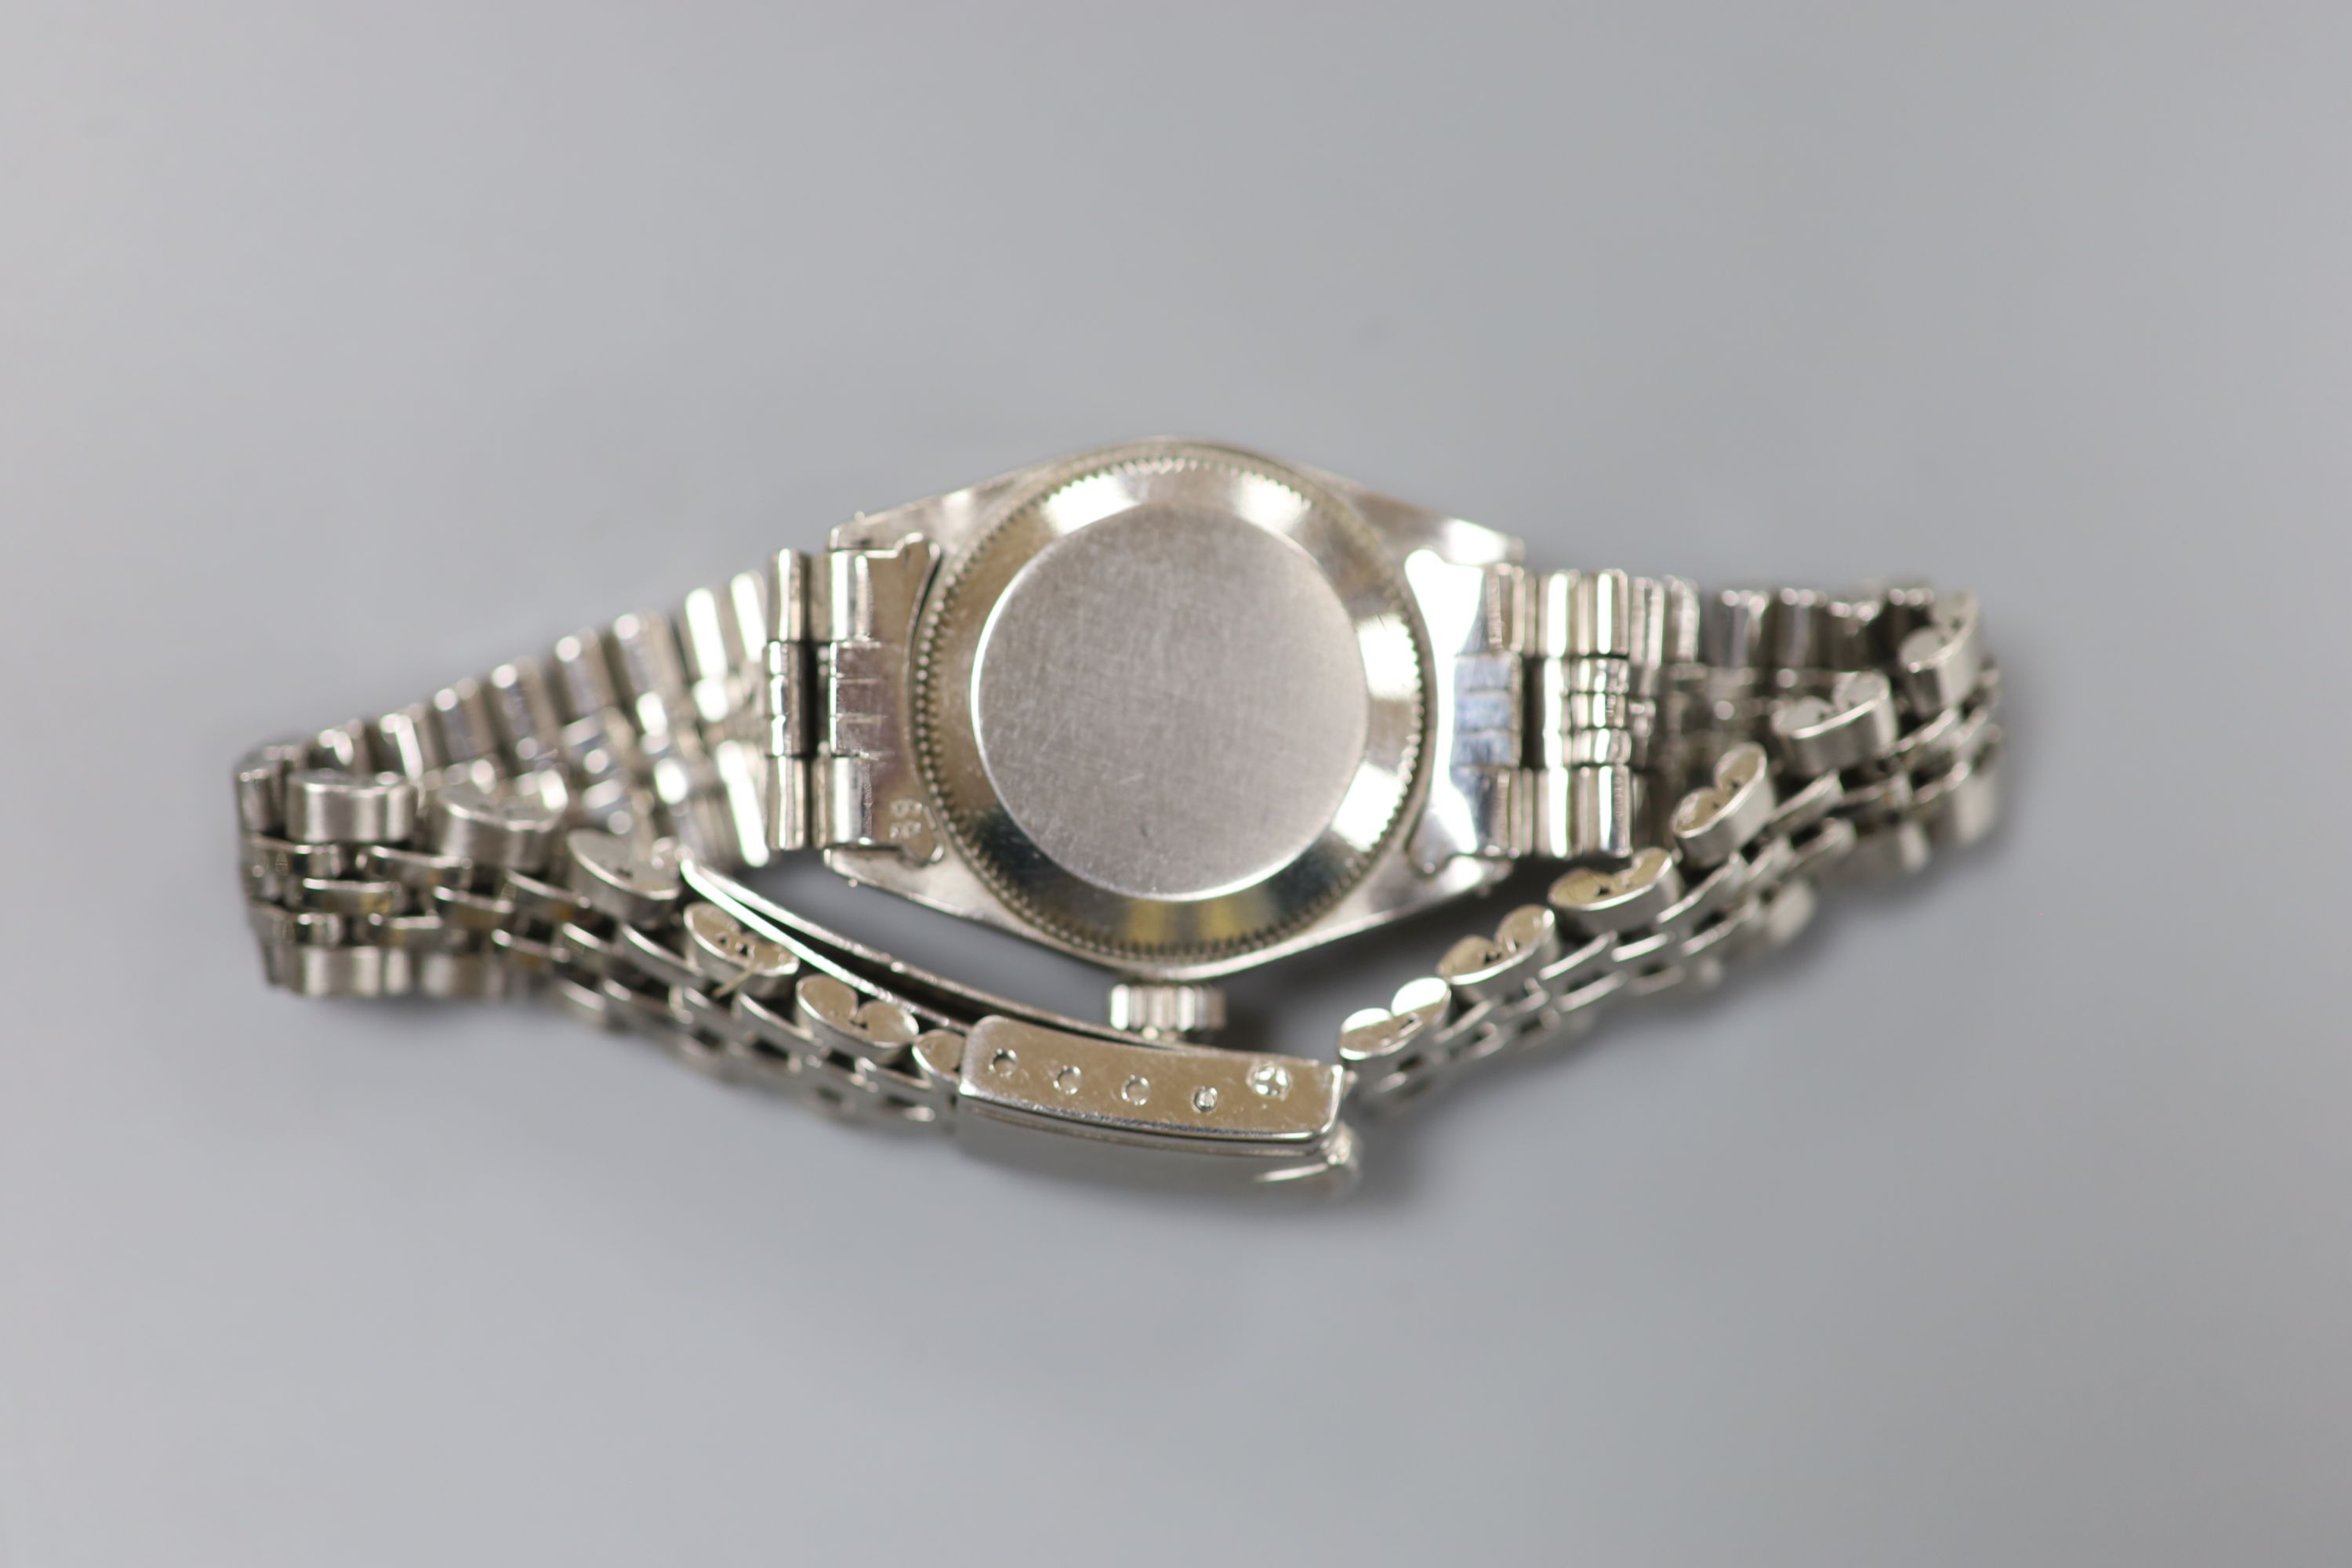 A ladys 1960s stainless steel Rolex Oyster Perpetual Date wrist watch, on Rolex bracelet, model no. 6517, serial no.1529297,